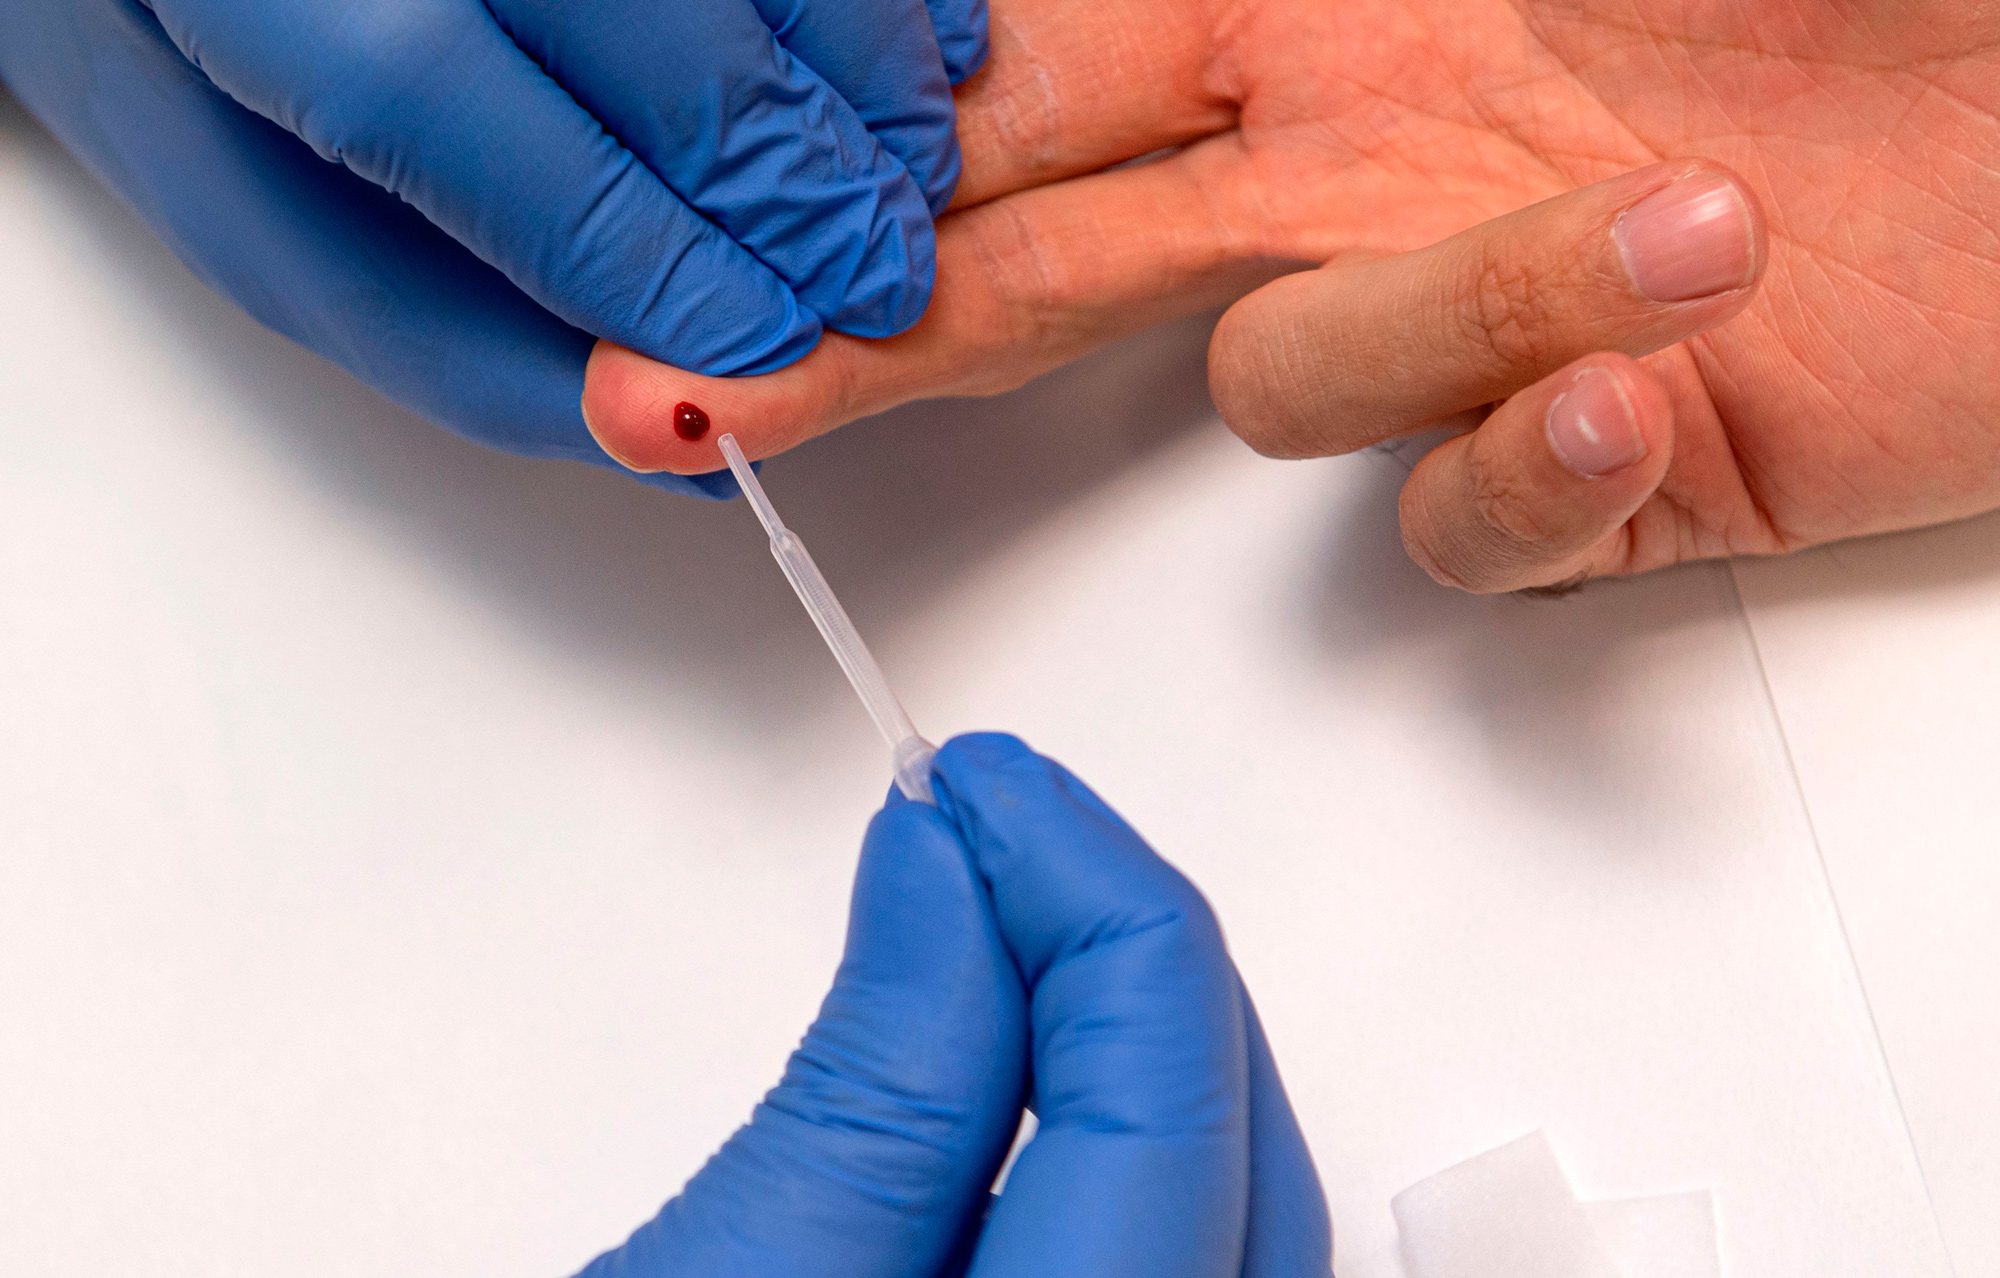 A person undergoes a finger prick blood sample as part of of an antibody rapid serological test for COVID-19 on May 6 at the Tor Vergata Covid hospital in Rome.